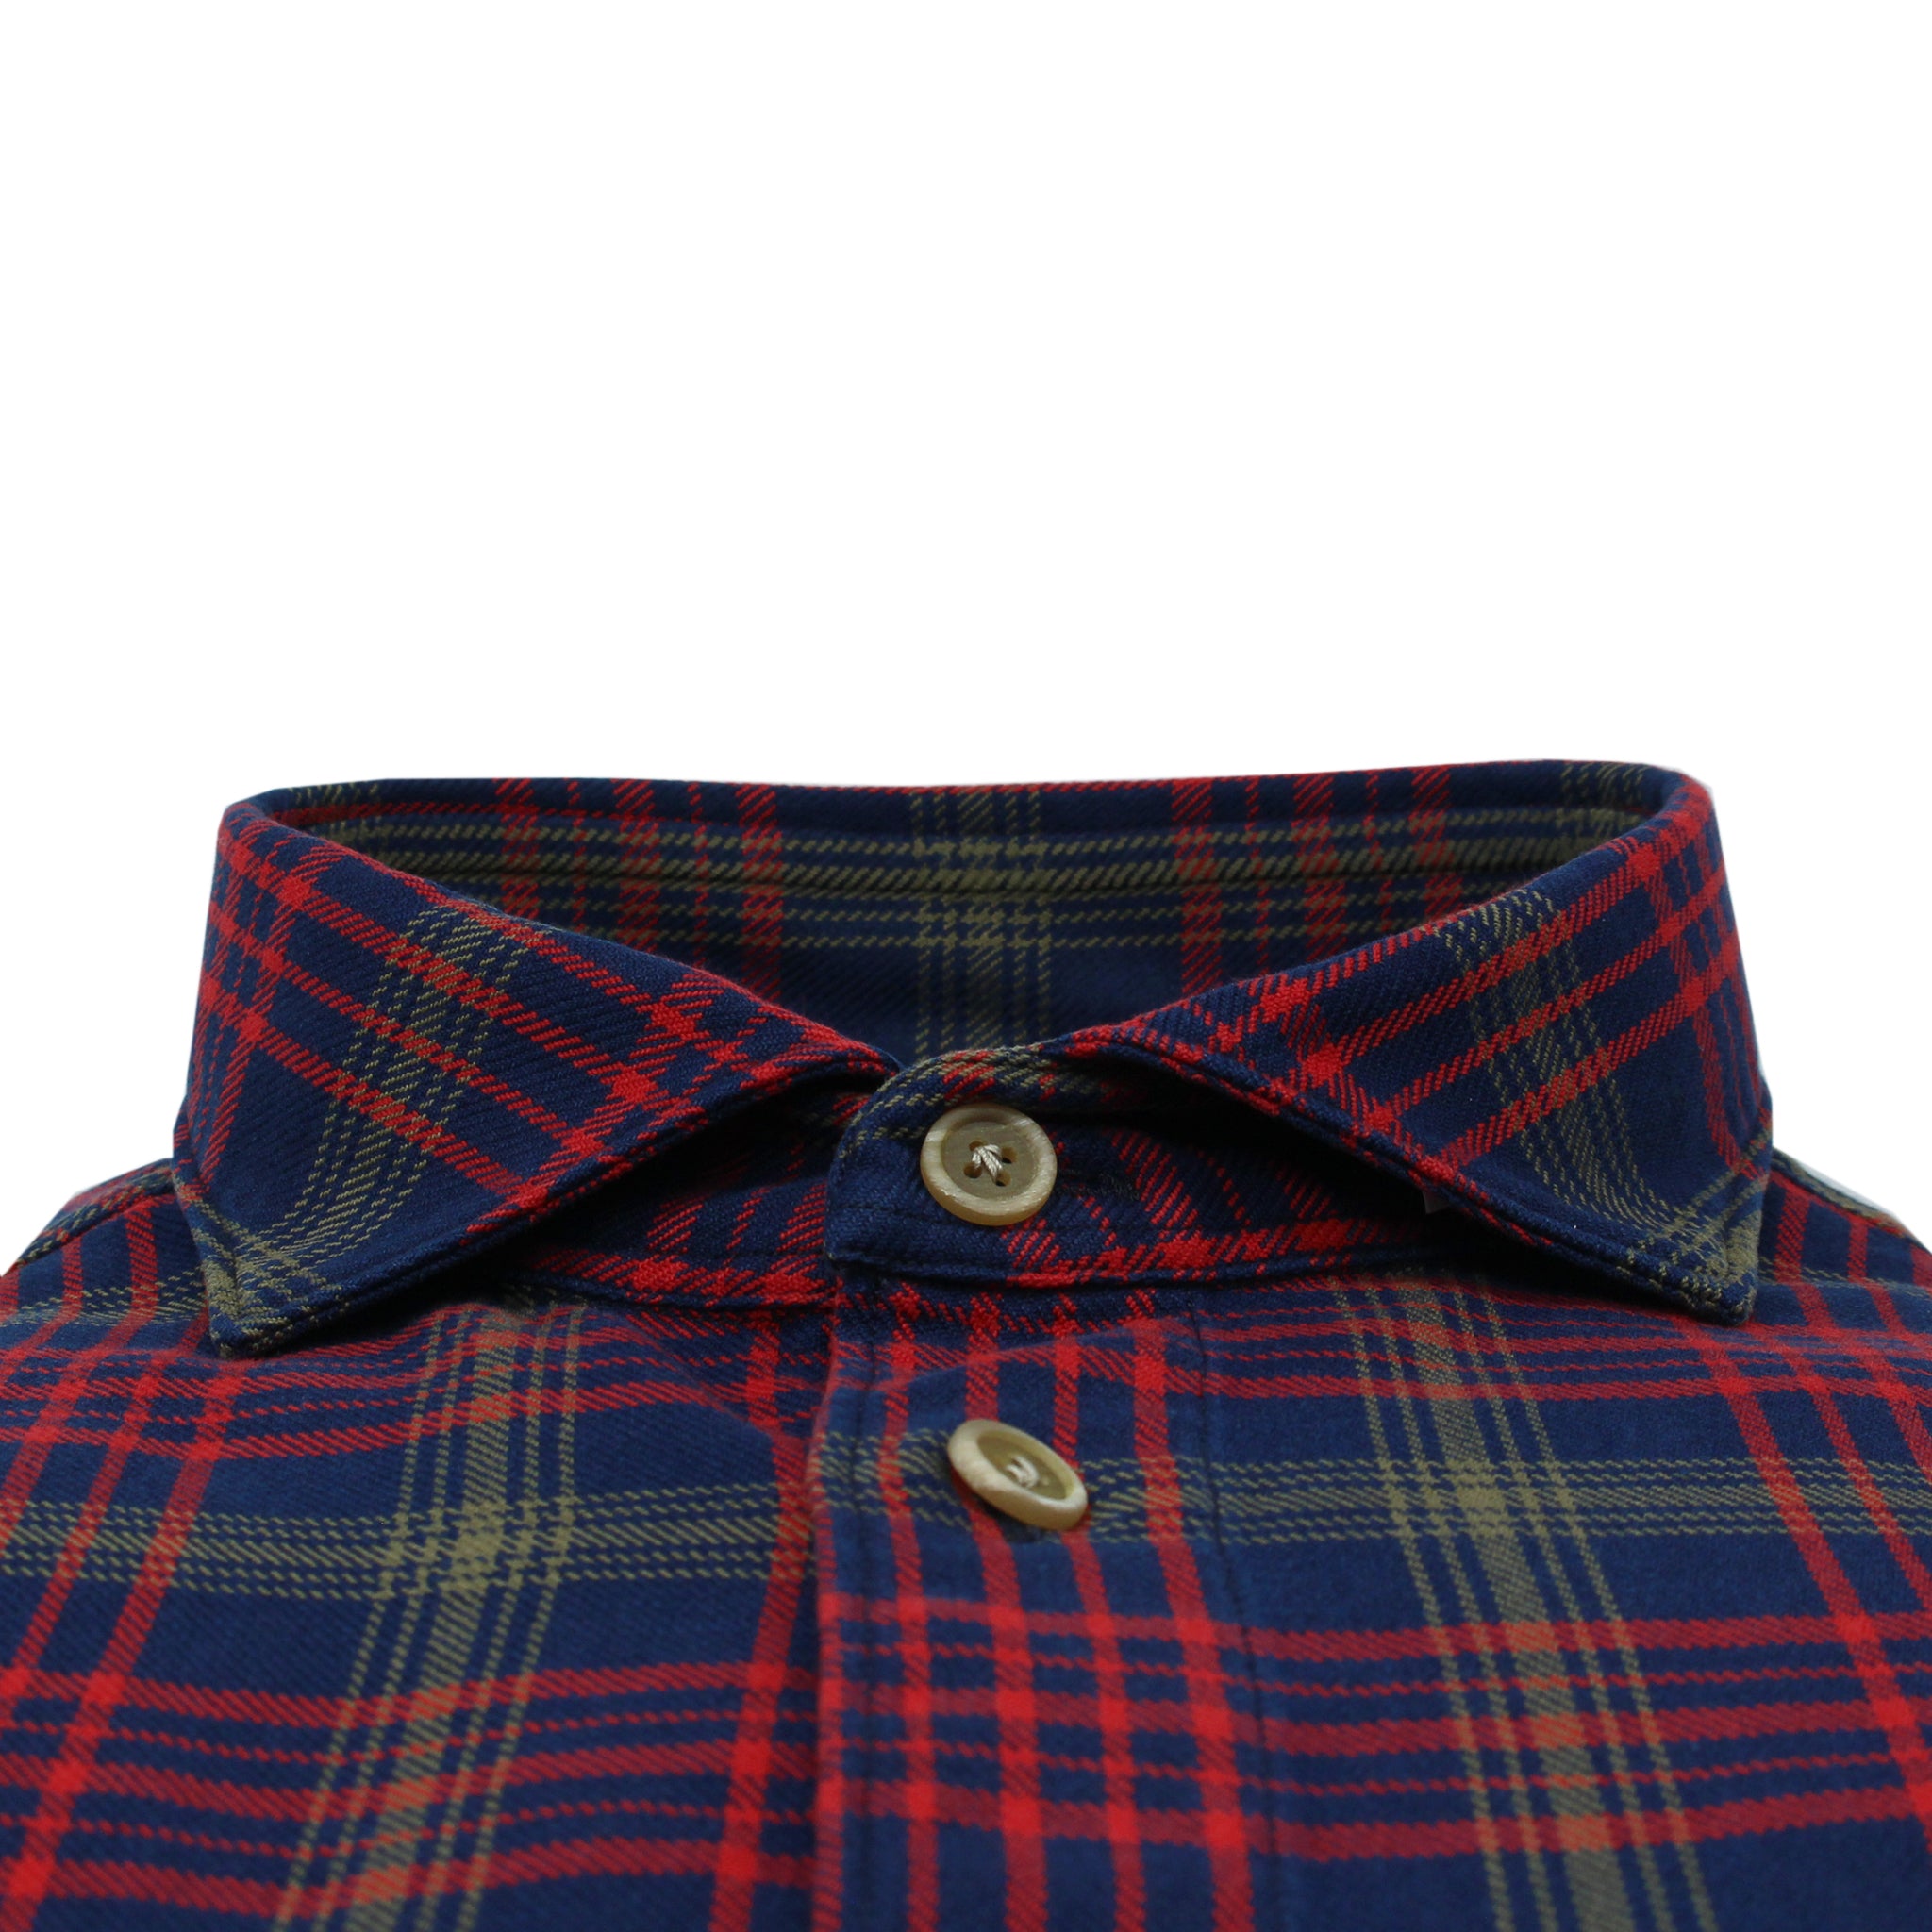 Madison Regular Fit sporty red and blue check cotton shirt